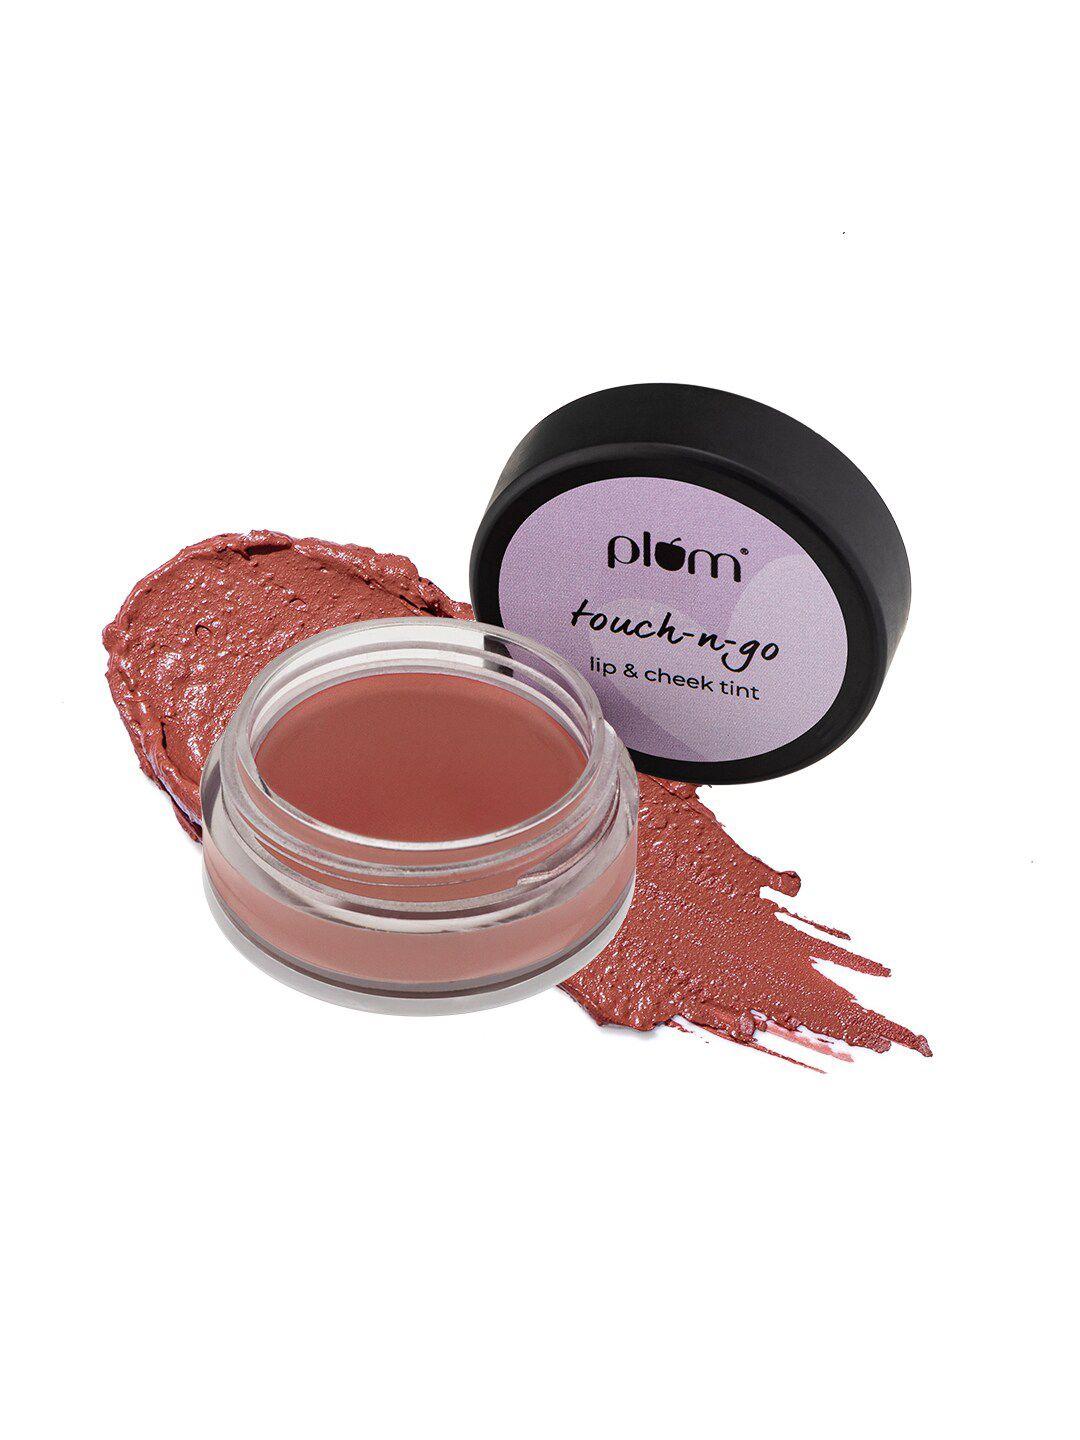 plum highly pigmented touch-n-go lip & cheek tint, 5g - bare it is 121